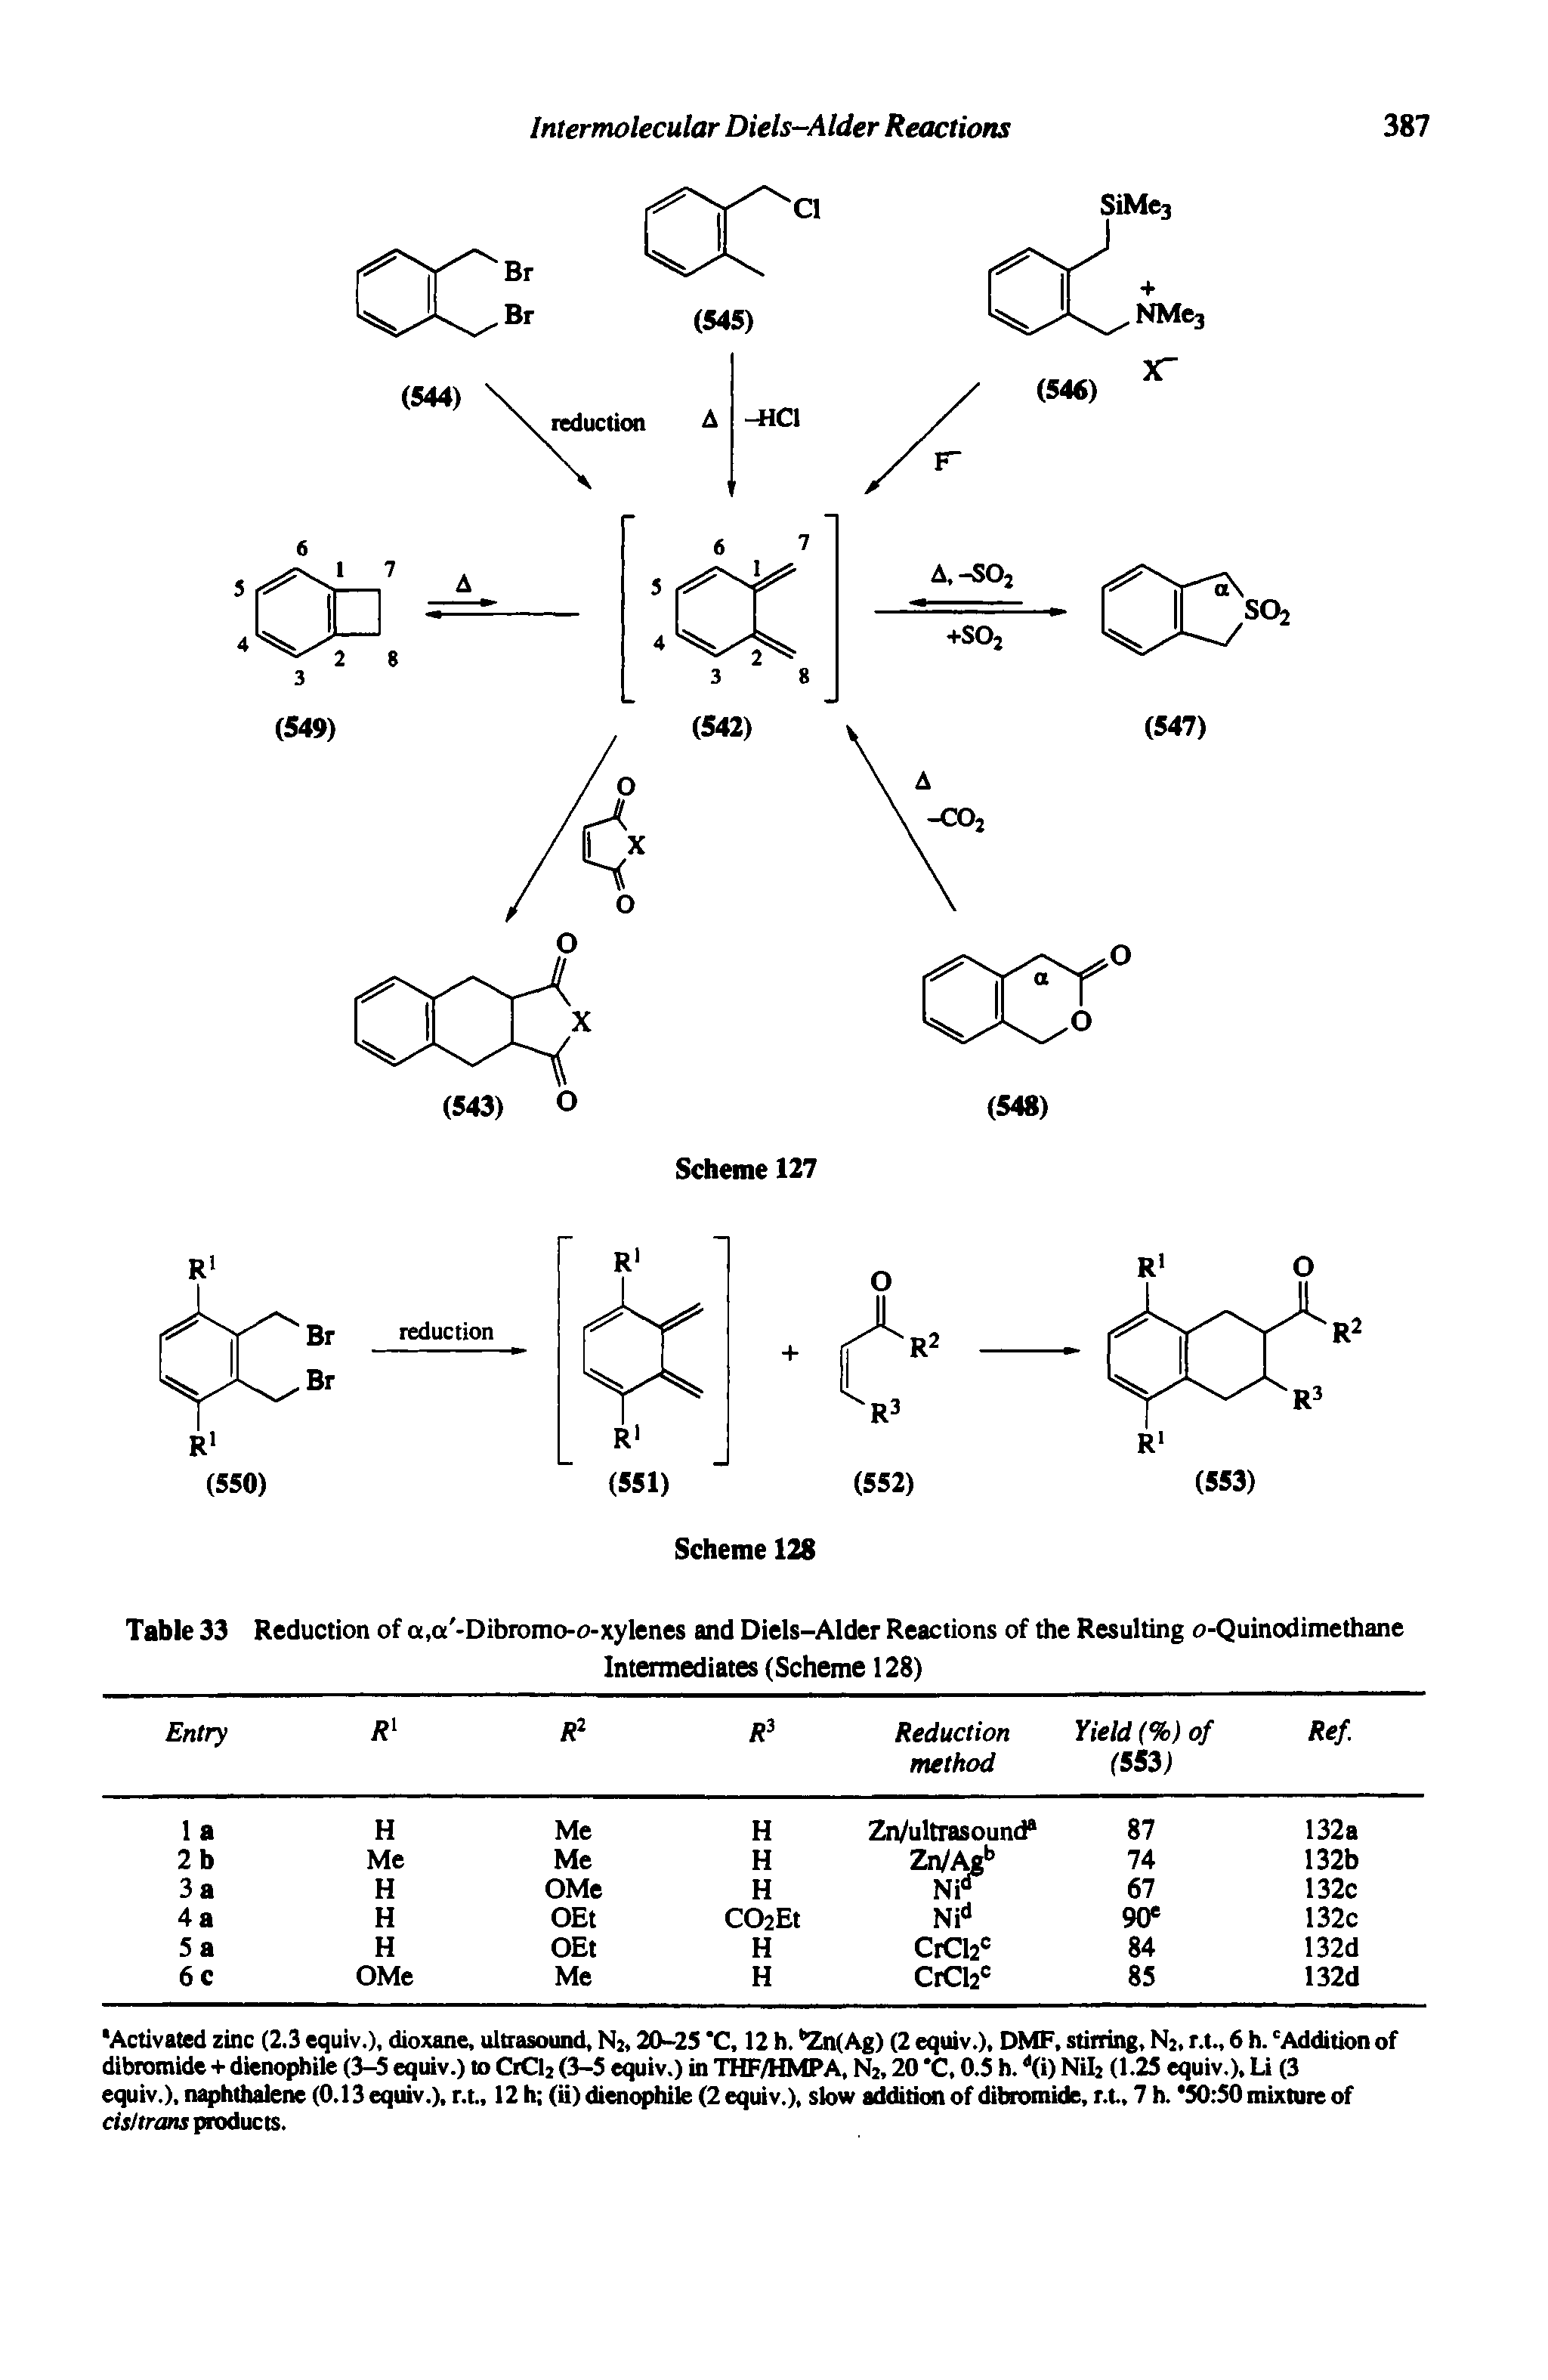 Table 33 Reduction of a,a -Dibiomo-o-xylenes and Diels-Alder Reactions of the Resulting o-Quinodimethane...